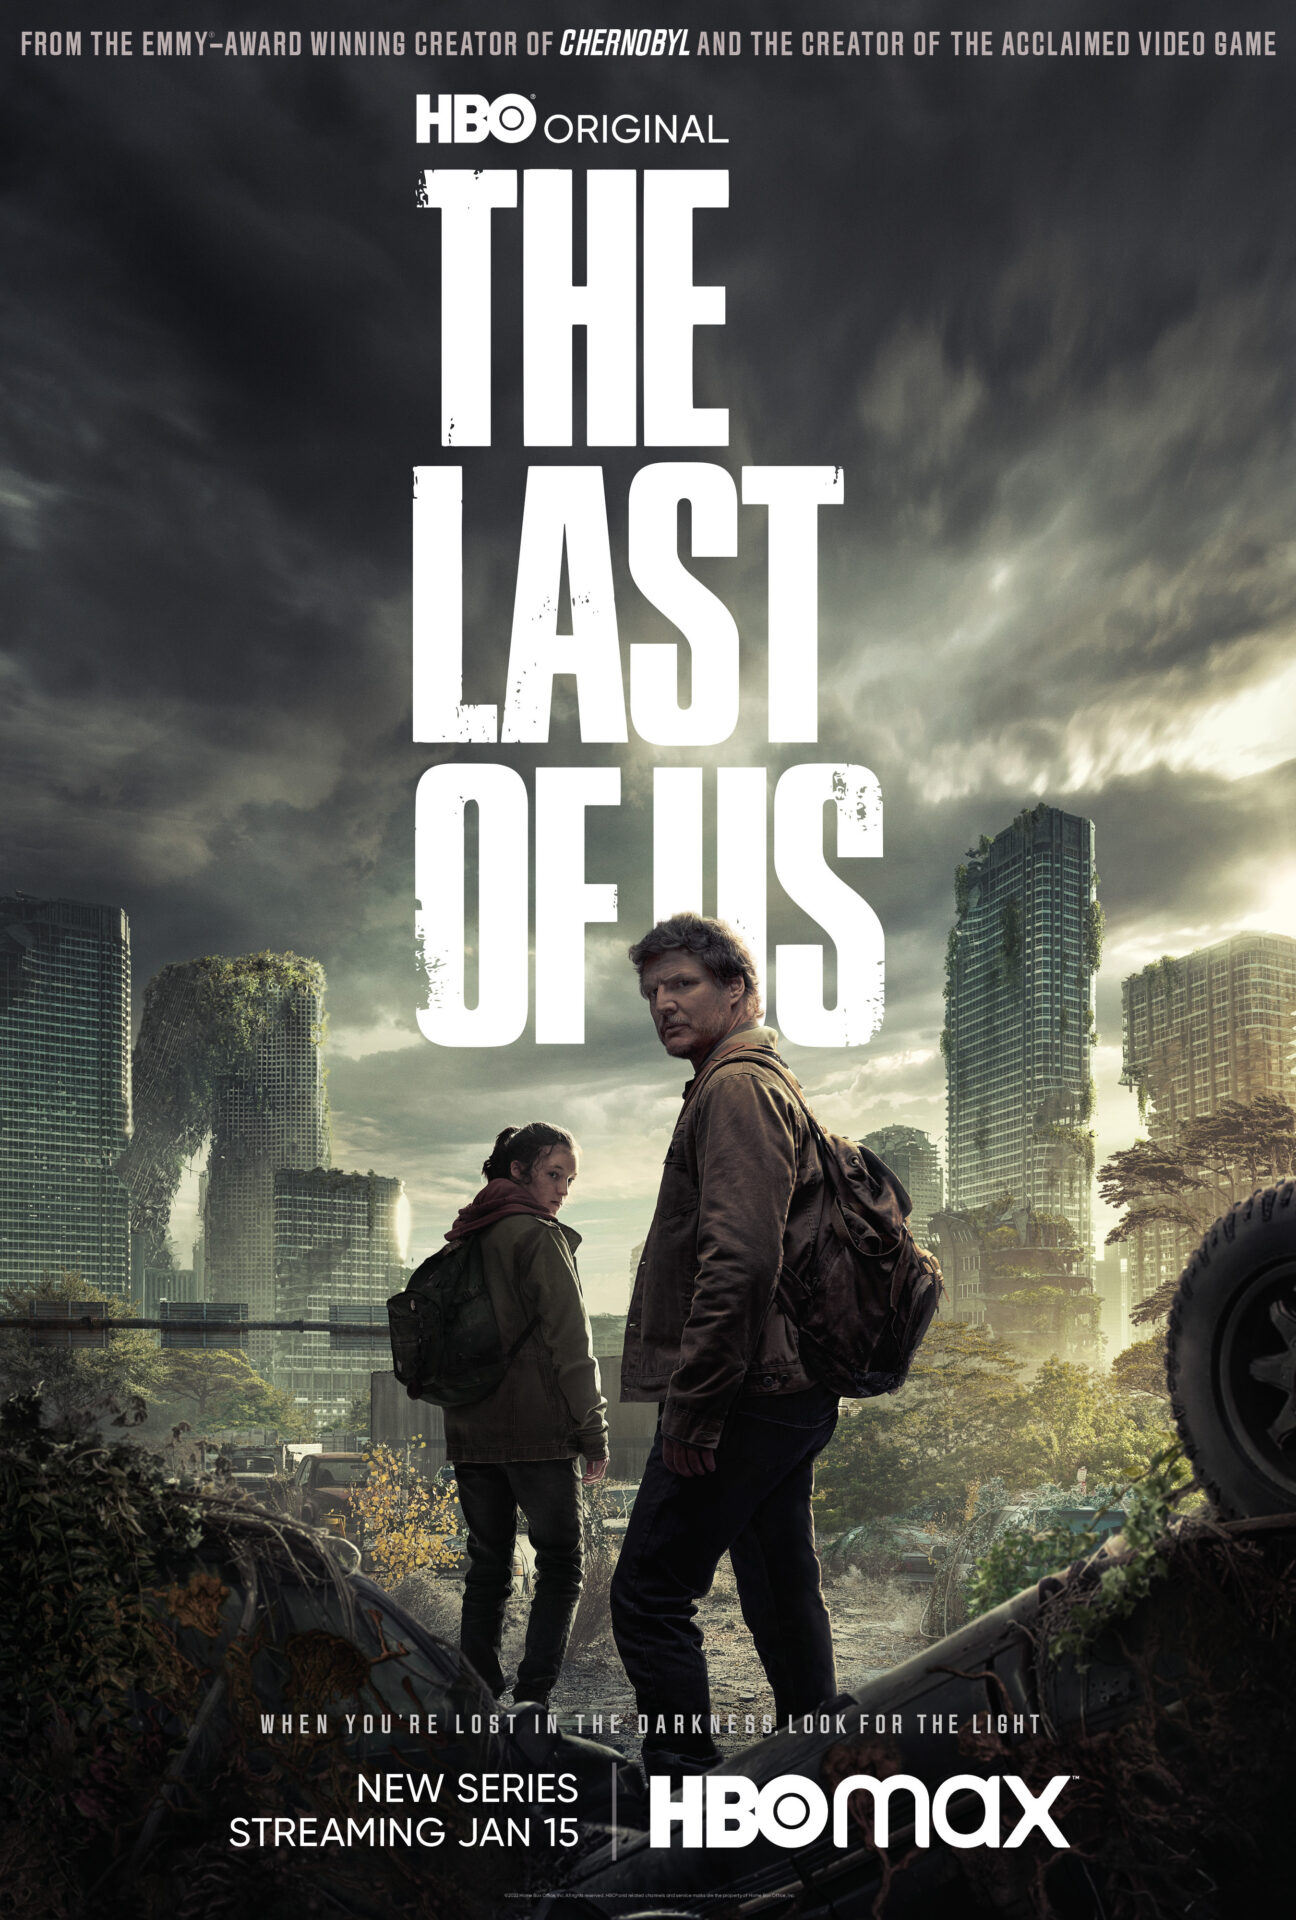 HBO's The Last of Us Gets Review Bombed After Historic Gay Episode